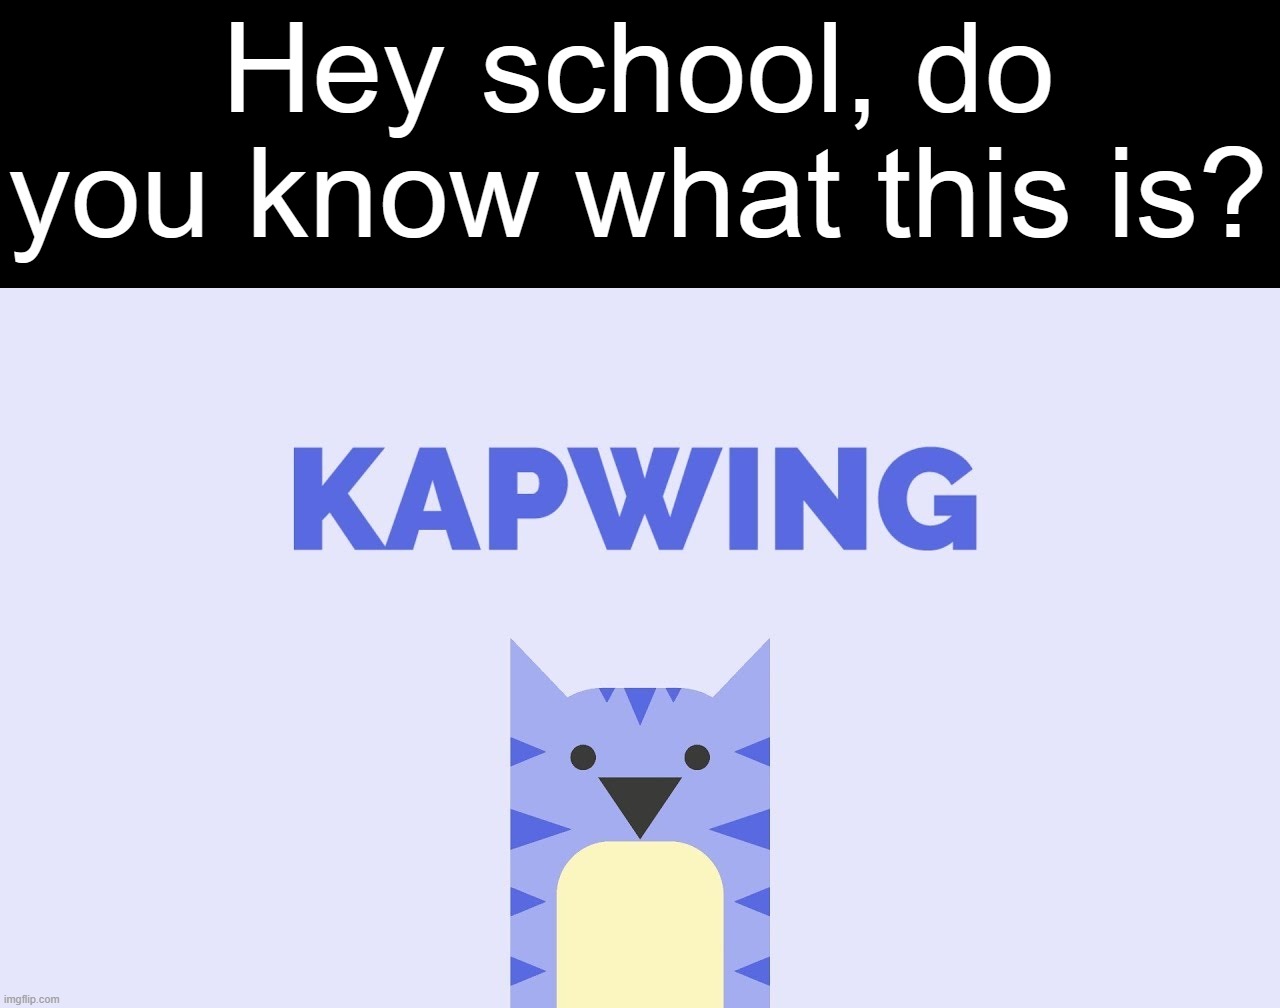 Hey school, do you know what Kapwing is? | Hey school, do you know what this is? | image tagged in kapwing,school,third world skeptical kid,meme | made w/ Imgflip meme maker